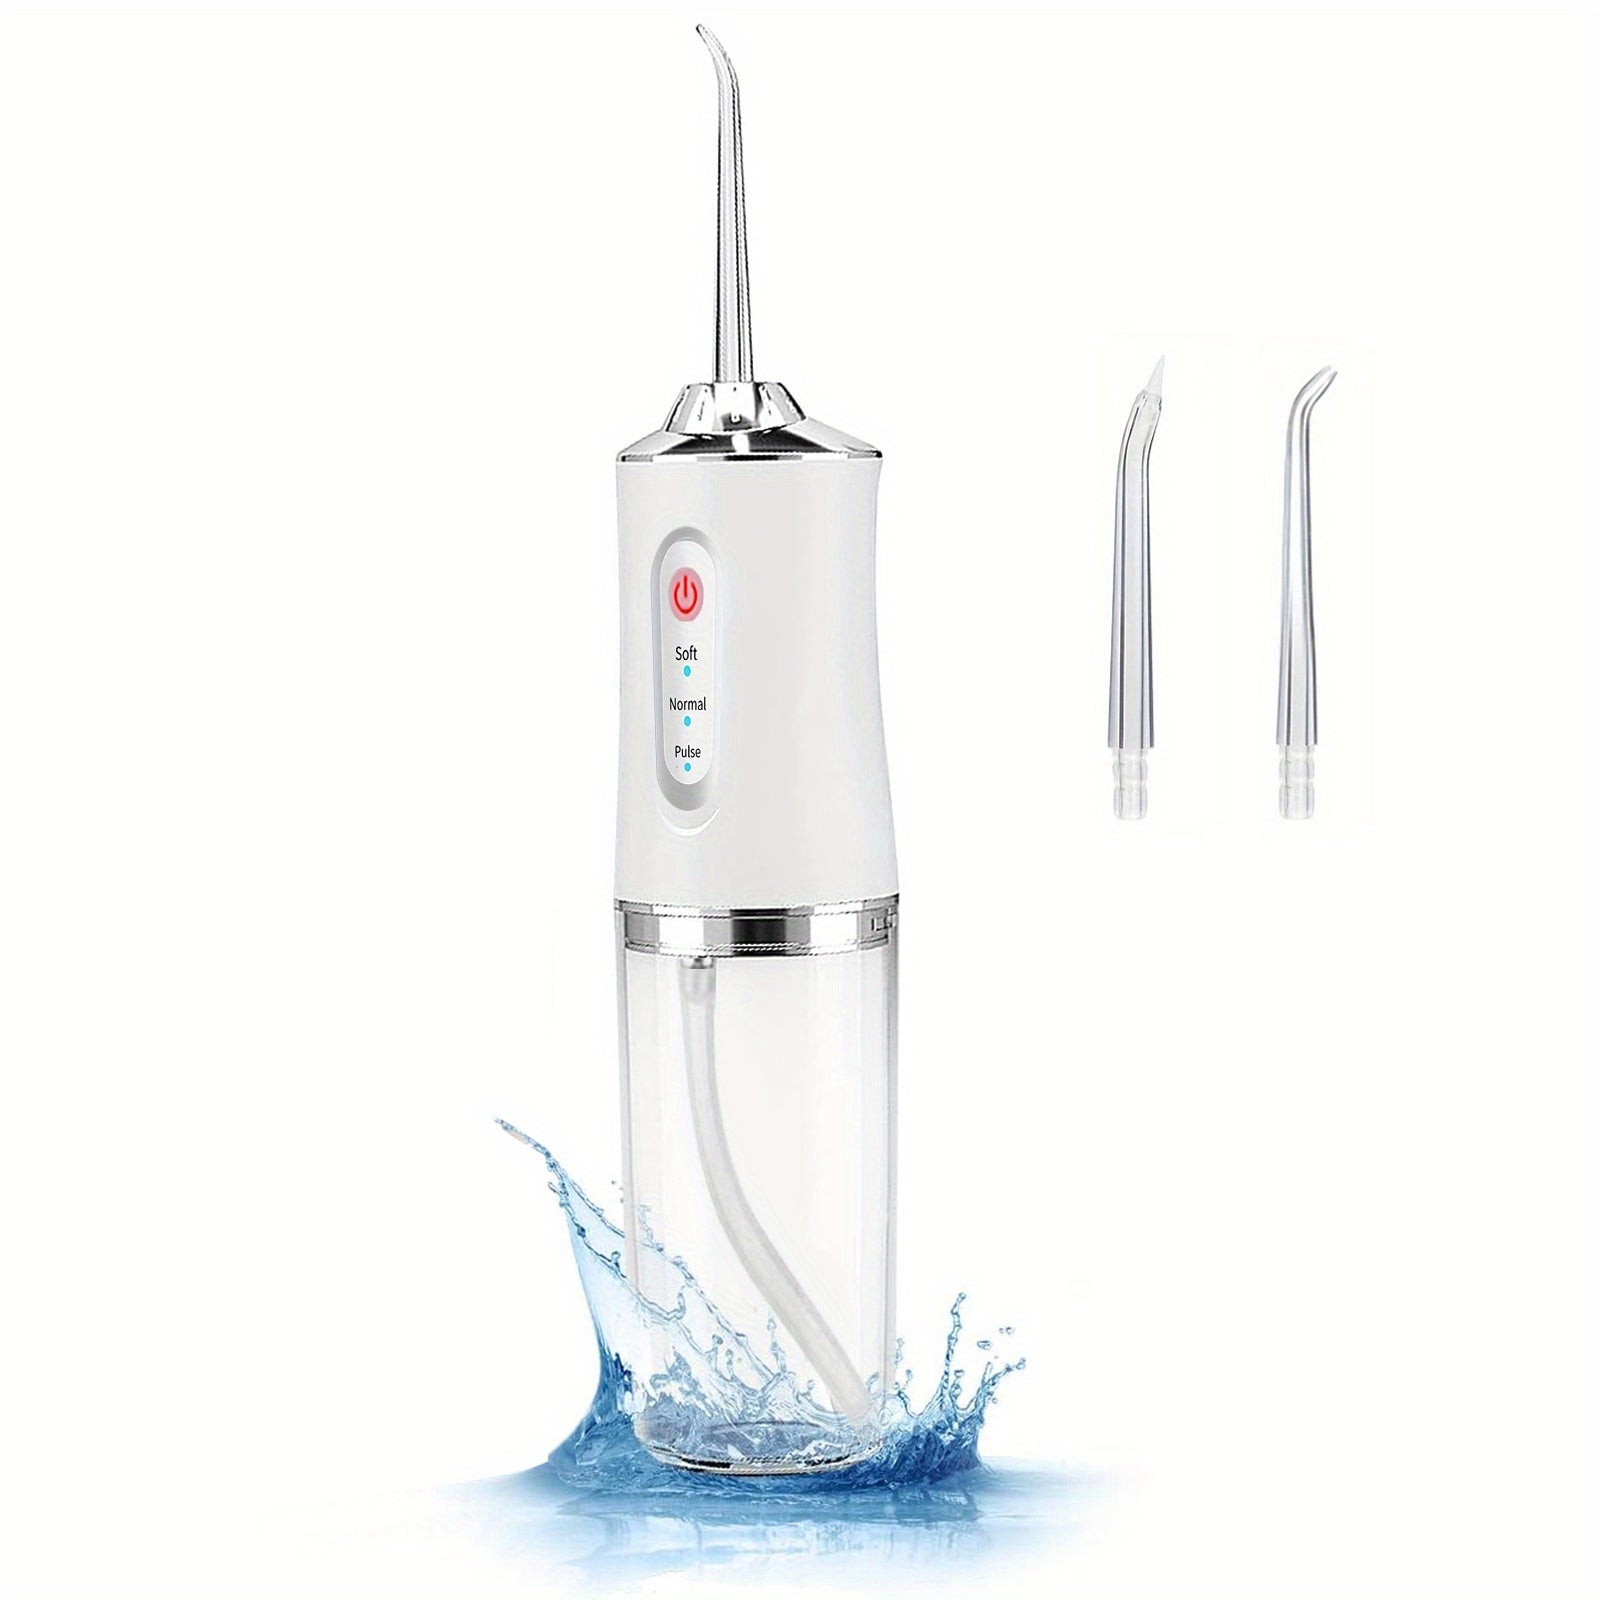 4 In 1 Water Flosser For Teeth, Cordless Water Flossers Oral Irrigator With DIY Mode 4 Jet Tips, Tooth Flosser, Portable And Rechargeable For Home Travel, For Men And Women Daily Teeth Care, Ideal For Gift, Father Day Gift - Cykapu